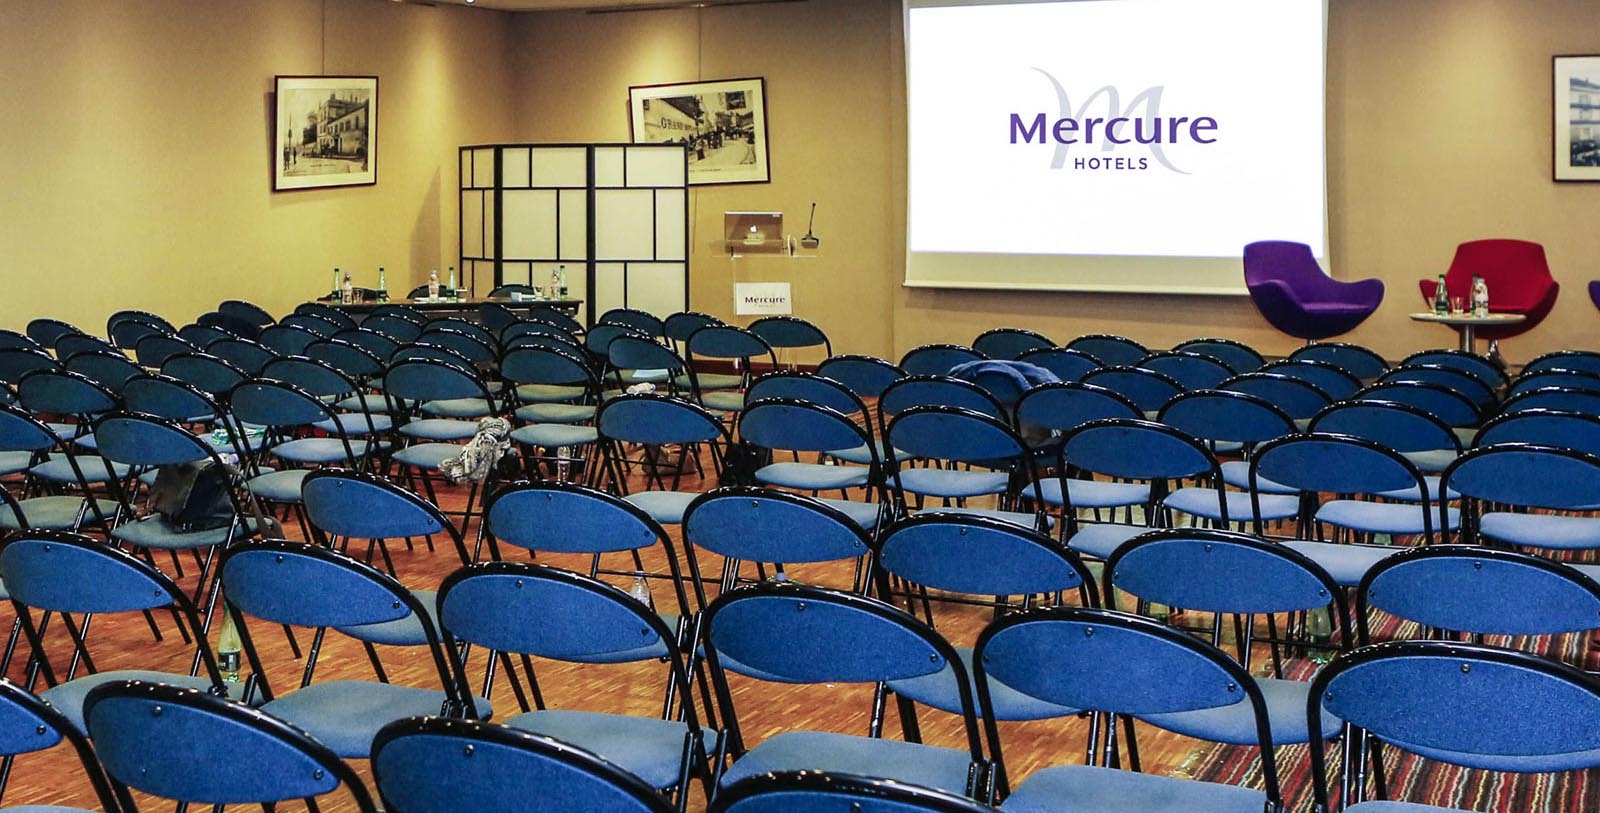 Image of Meeting Room, Mercure Angouleme Hotel de France, established 1600, member of Historic Hotels Worldwide 2019, France, Europe, Special Occasions